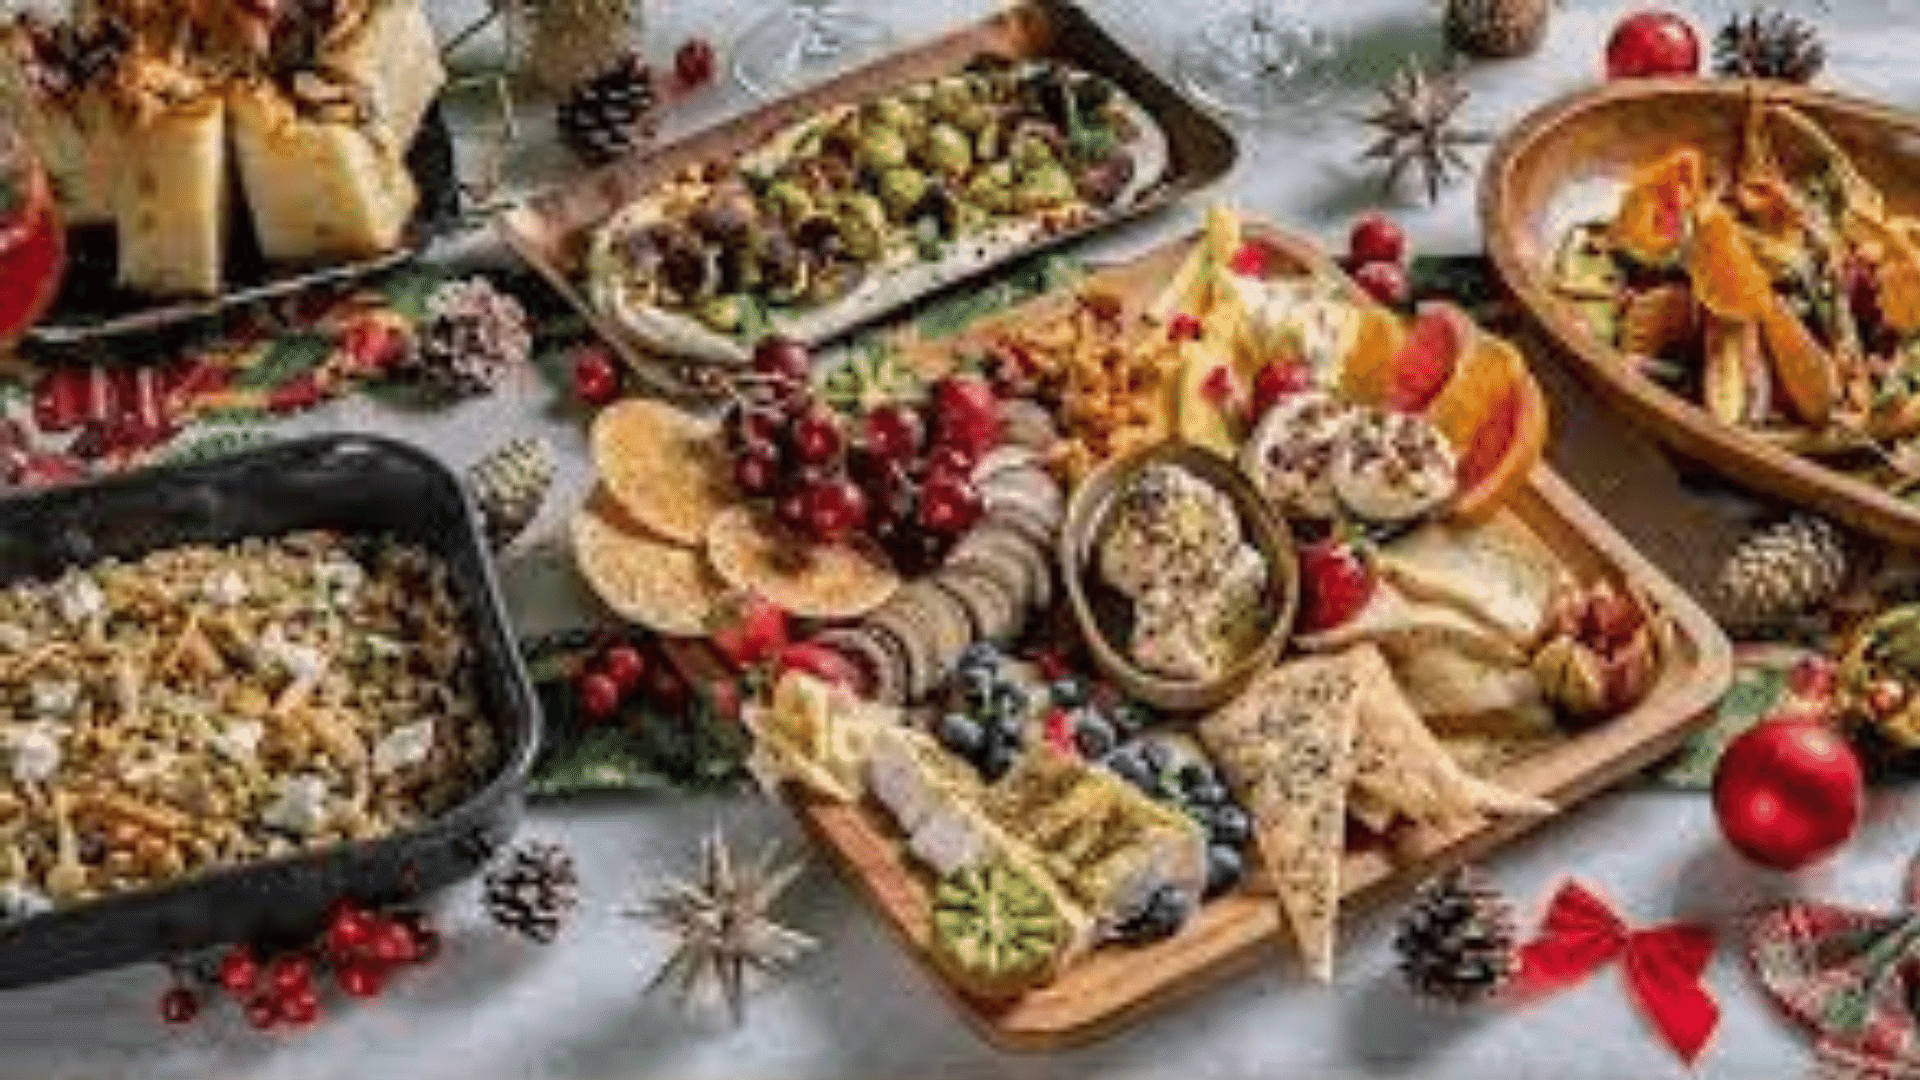 You are currently viewing Guilt-free Christmas feasting: 9 tips to indulge mindfully